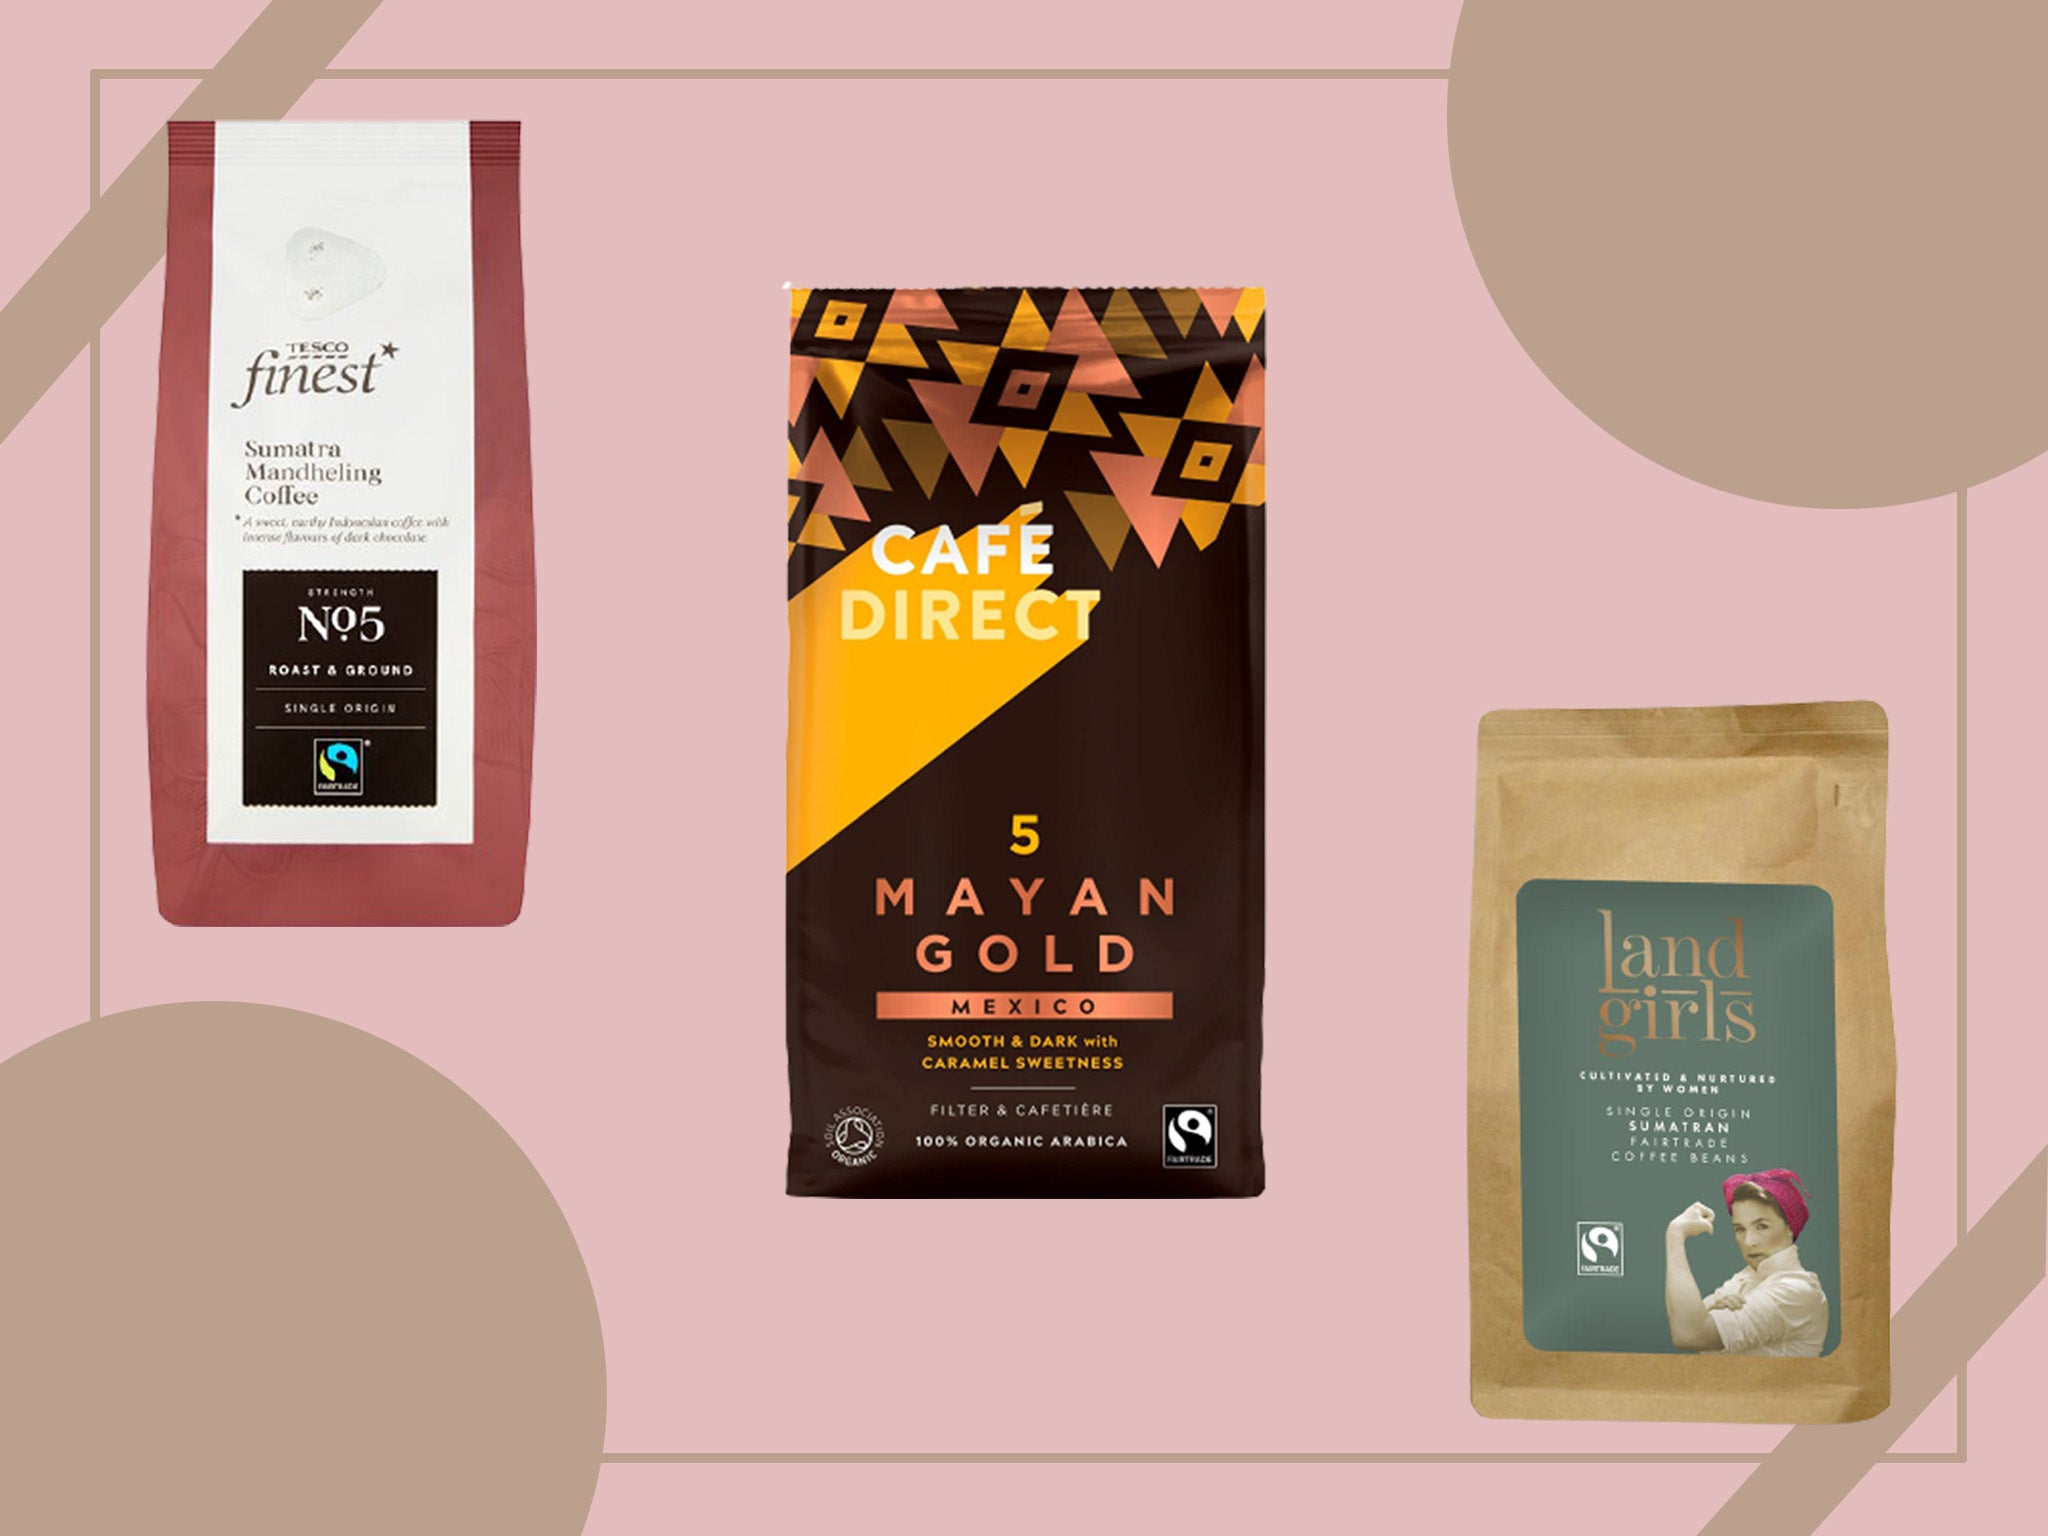 The Fairtrade certification is the easy way to make sure the coffee you drink doesn’t do harm to others